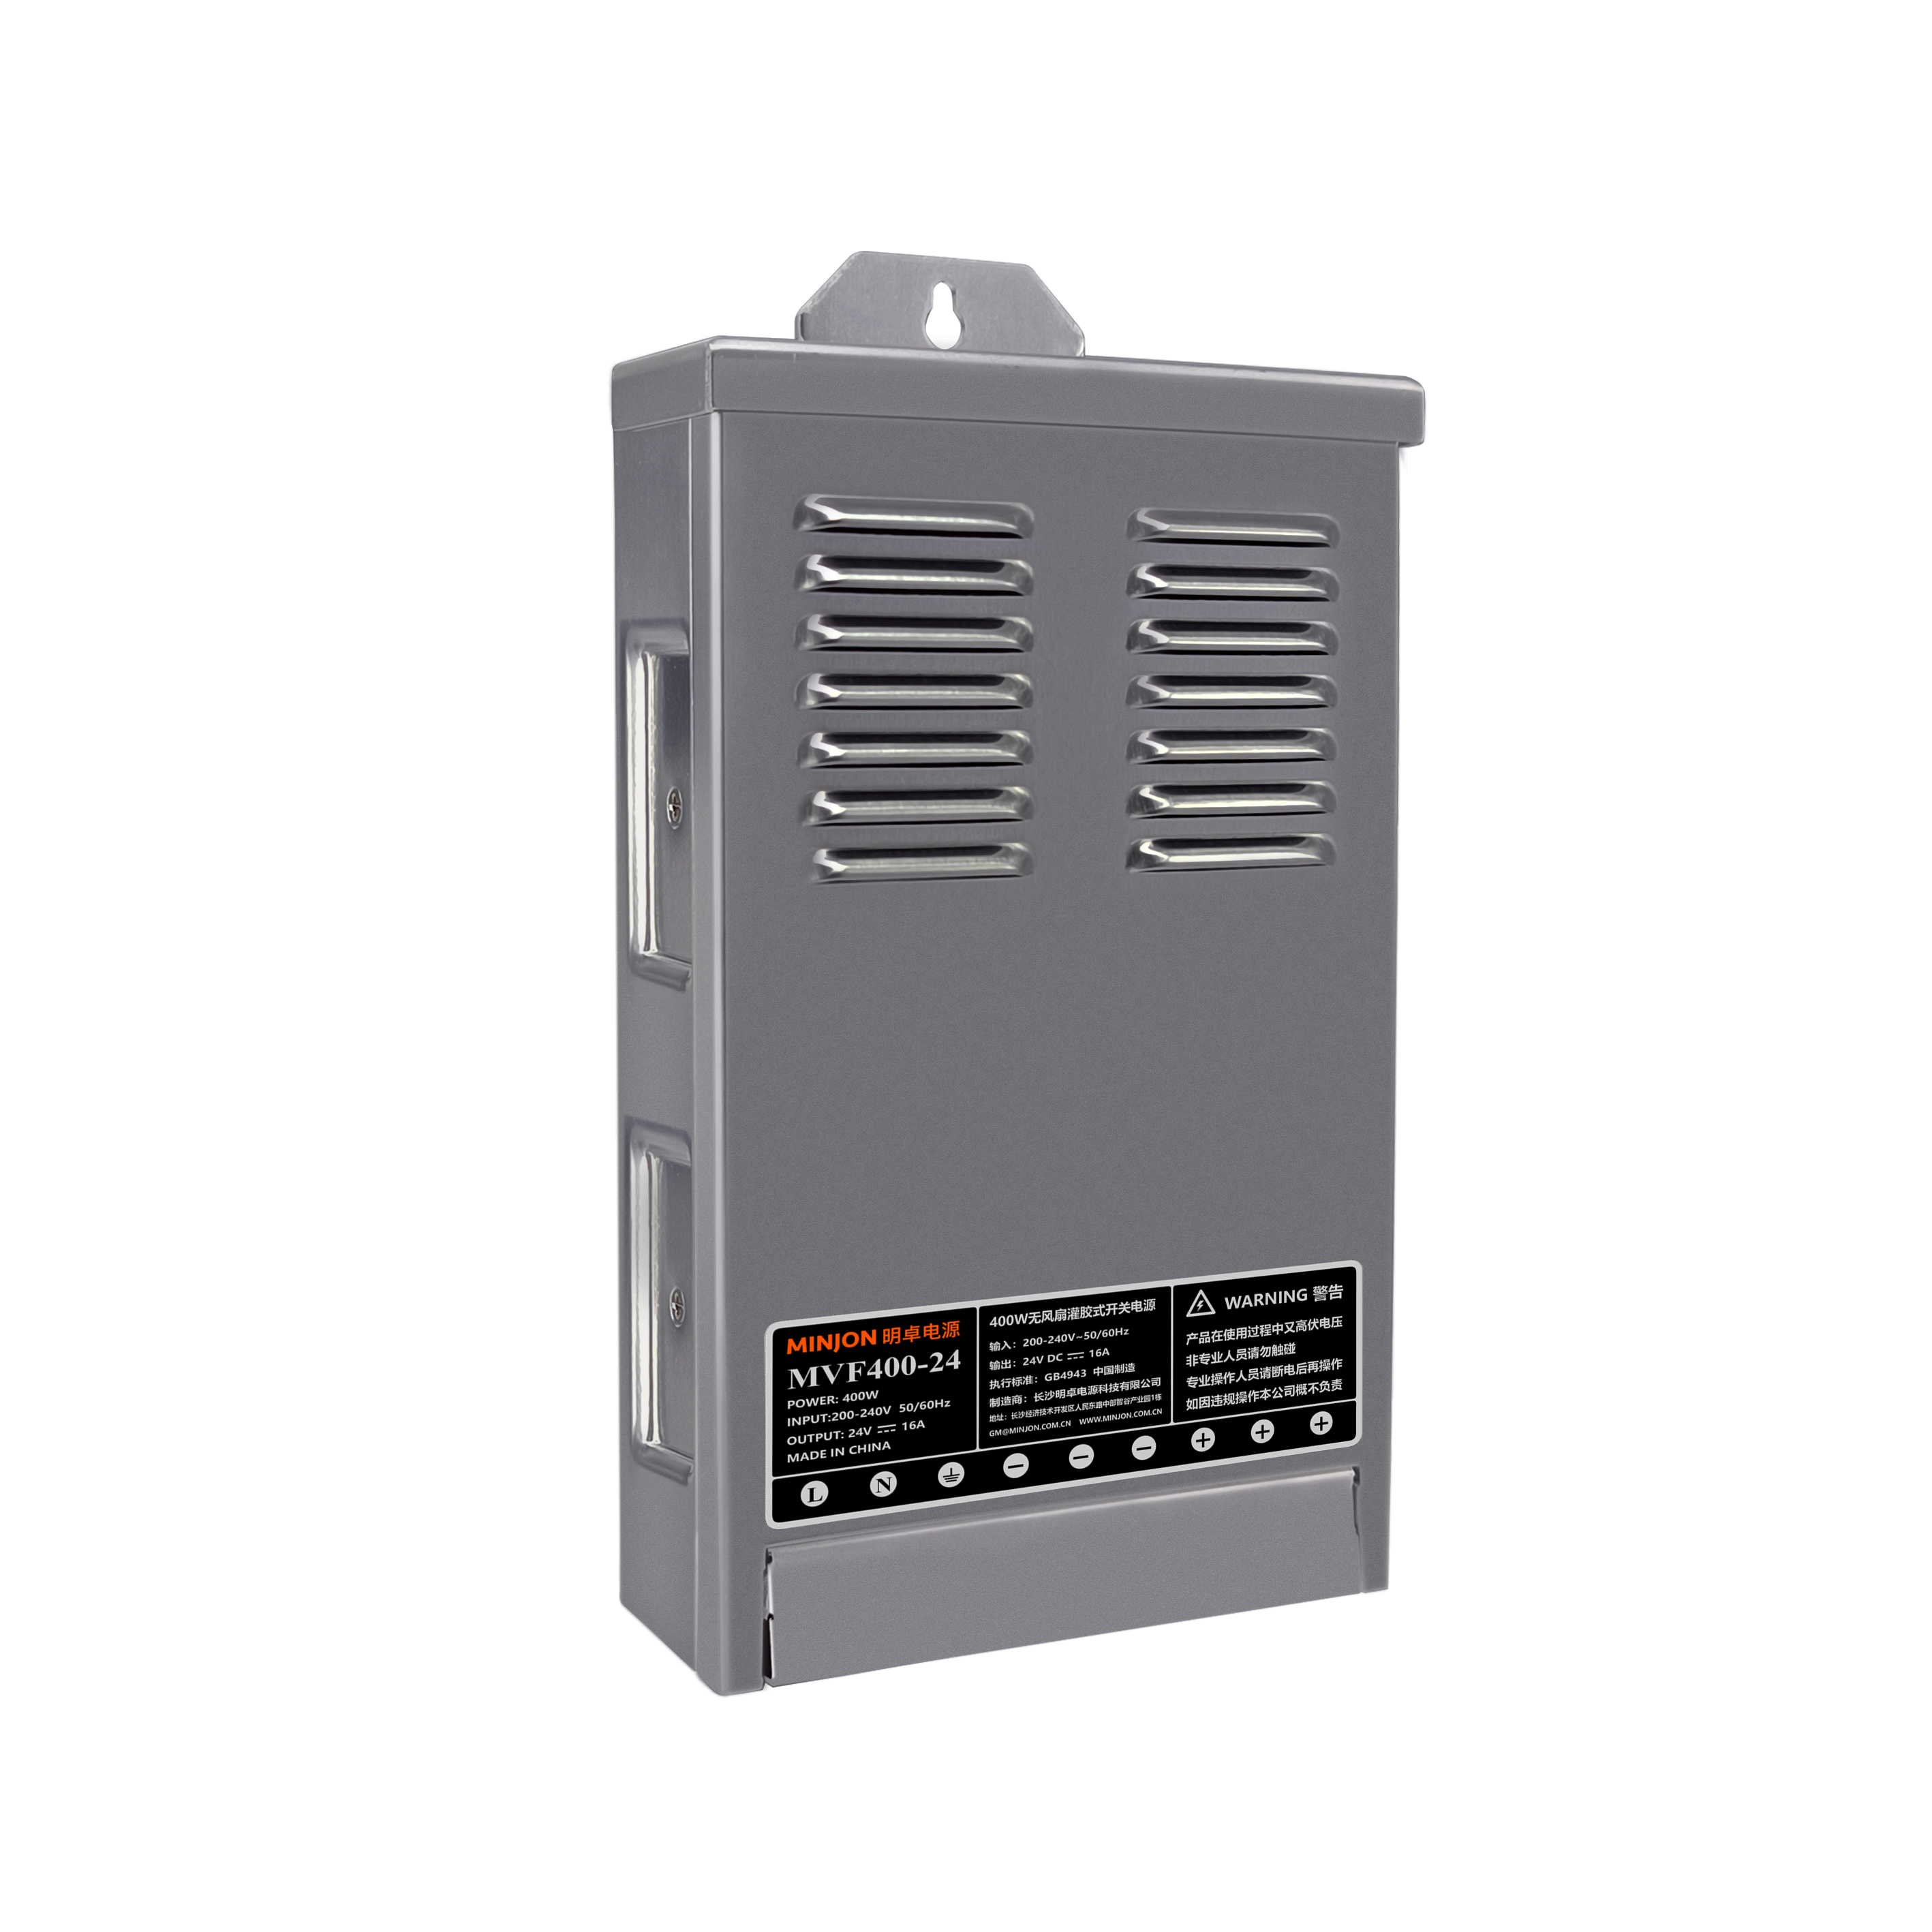 MVF400-24 Rainproof Sliver Power Supply Used Extensively